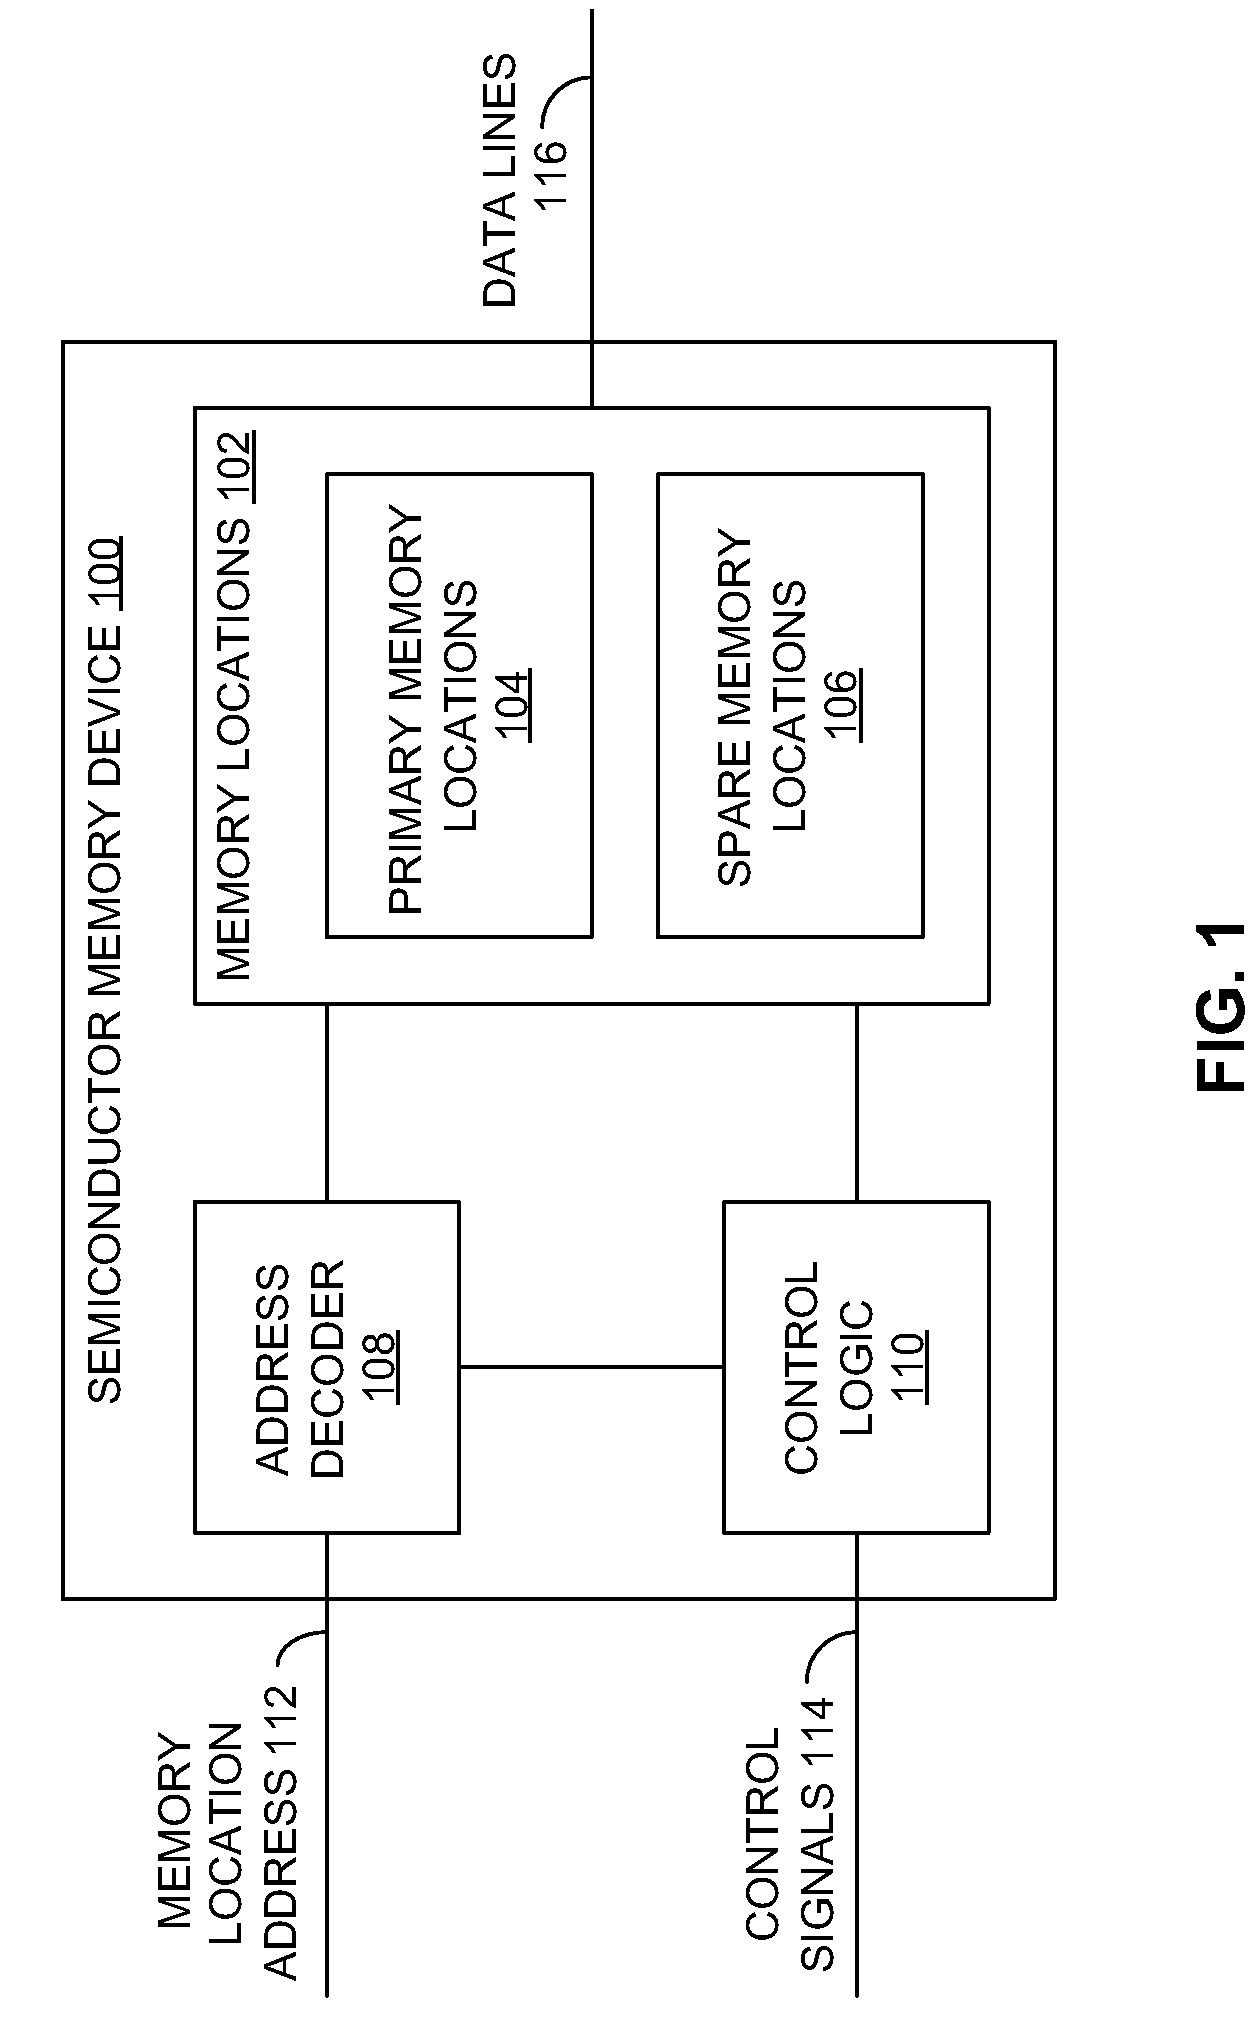 Semiconductor memory device and system providing spare memory locations